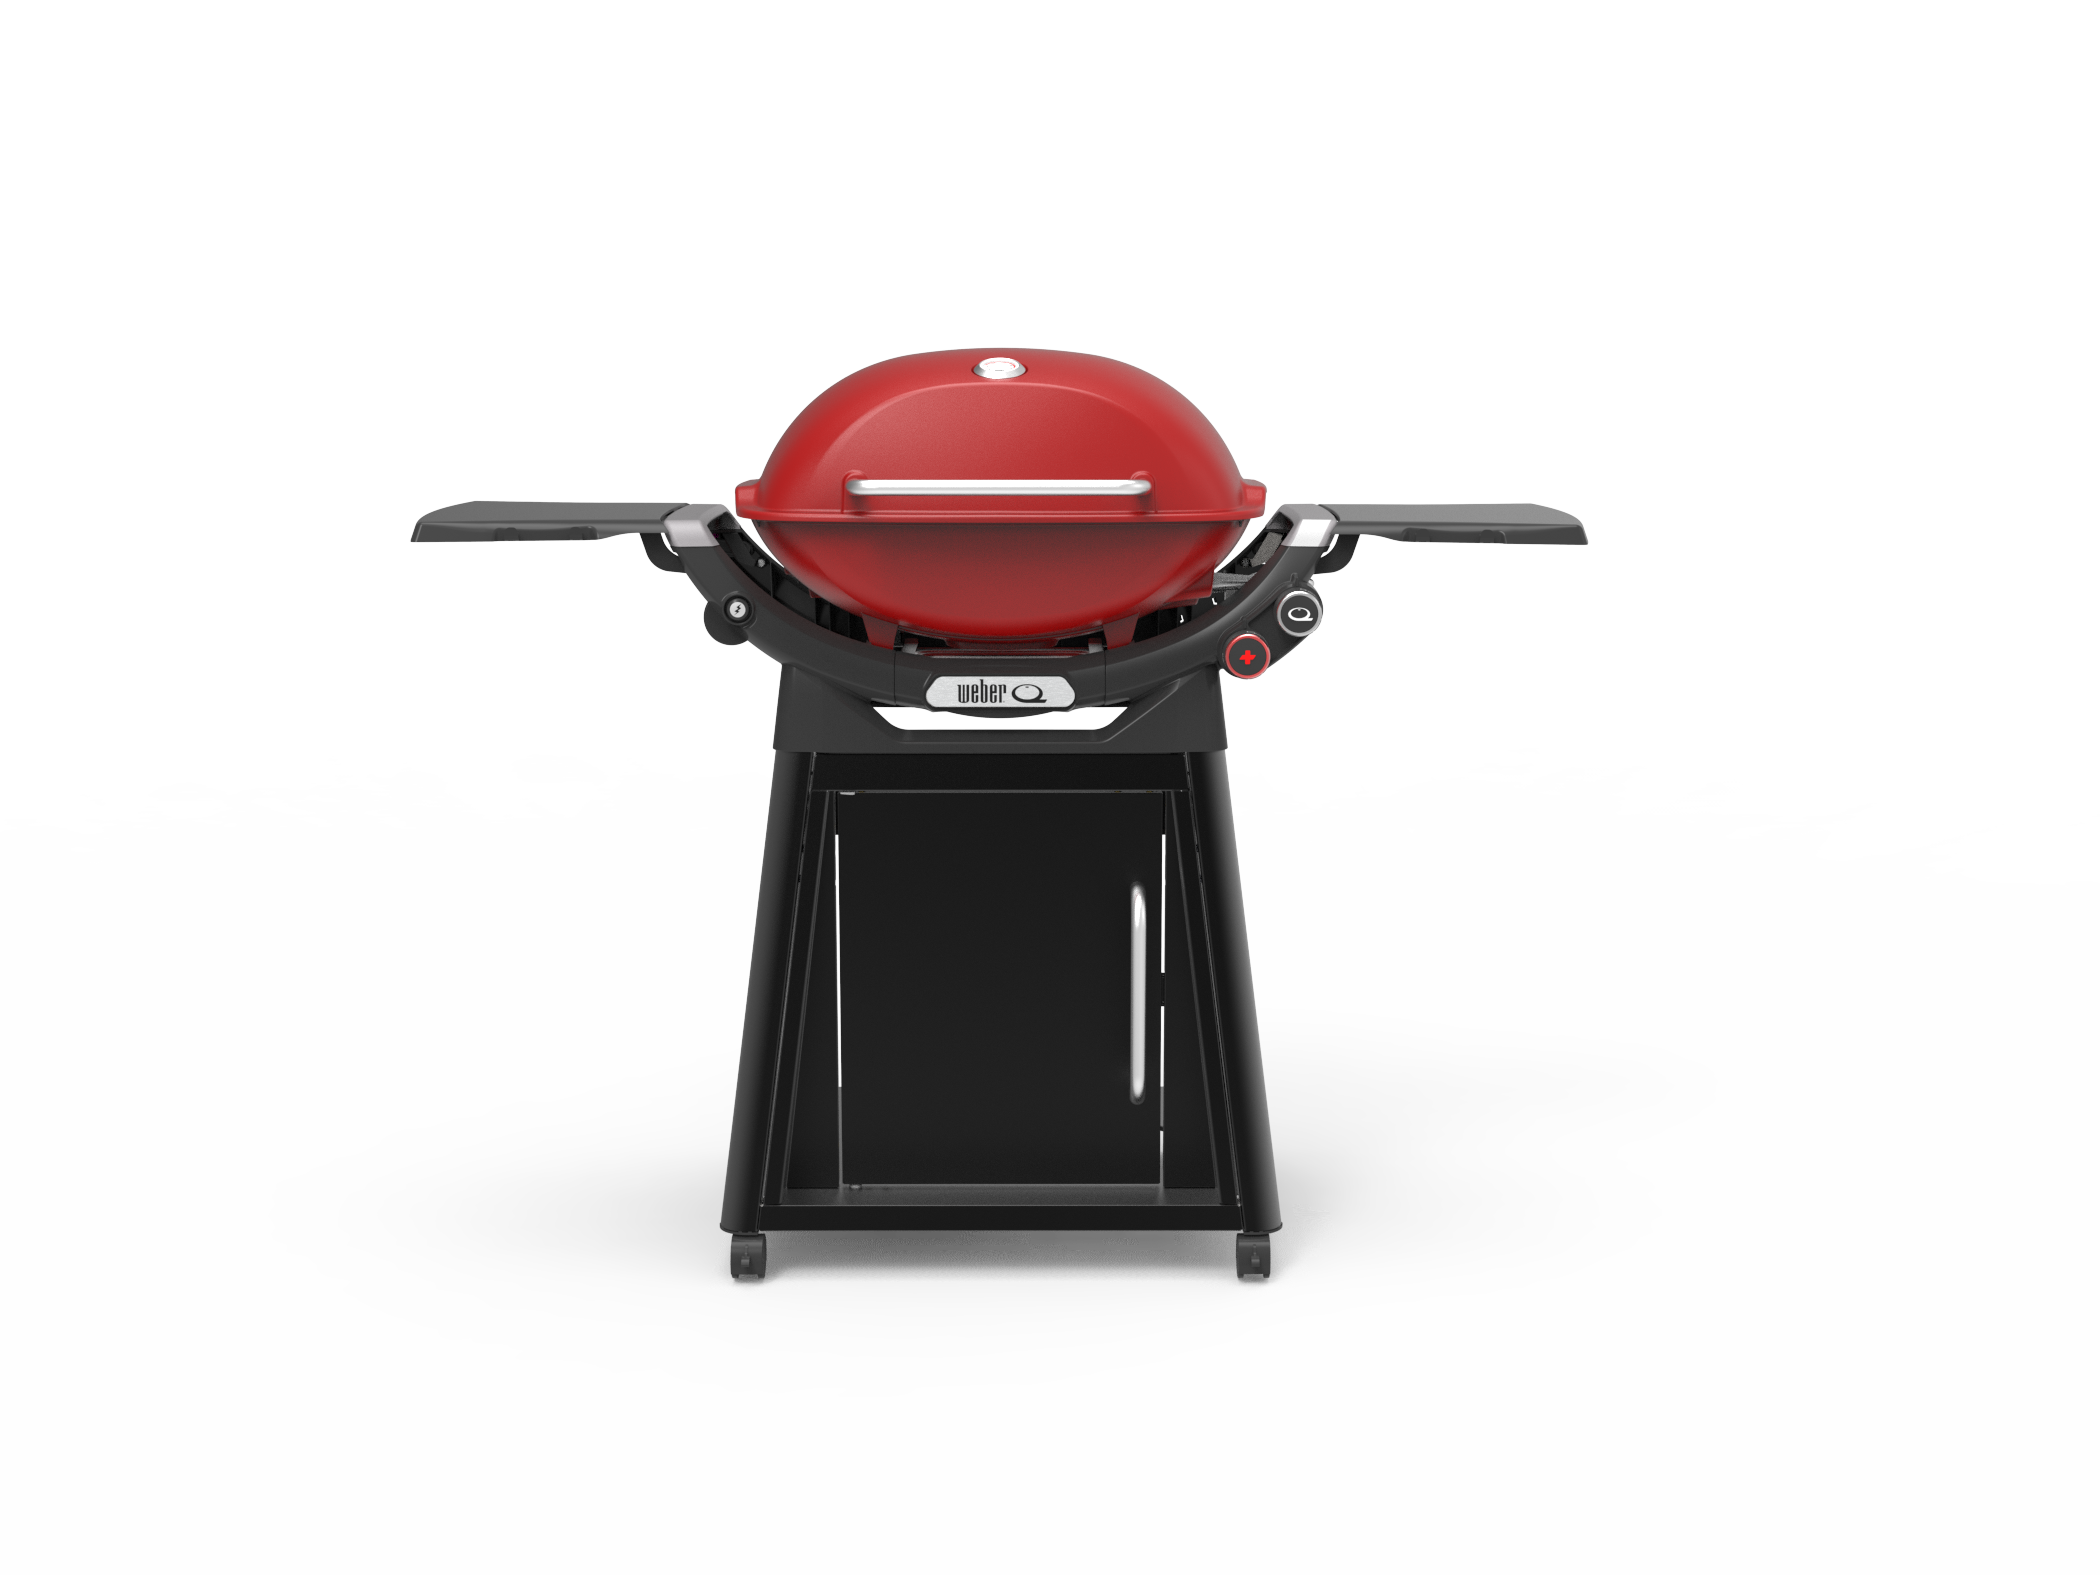 Weber Q 3200 N plus front view in flame red colour